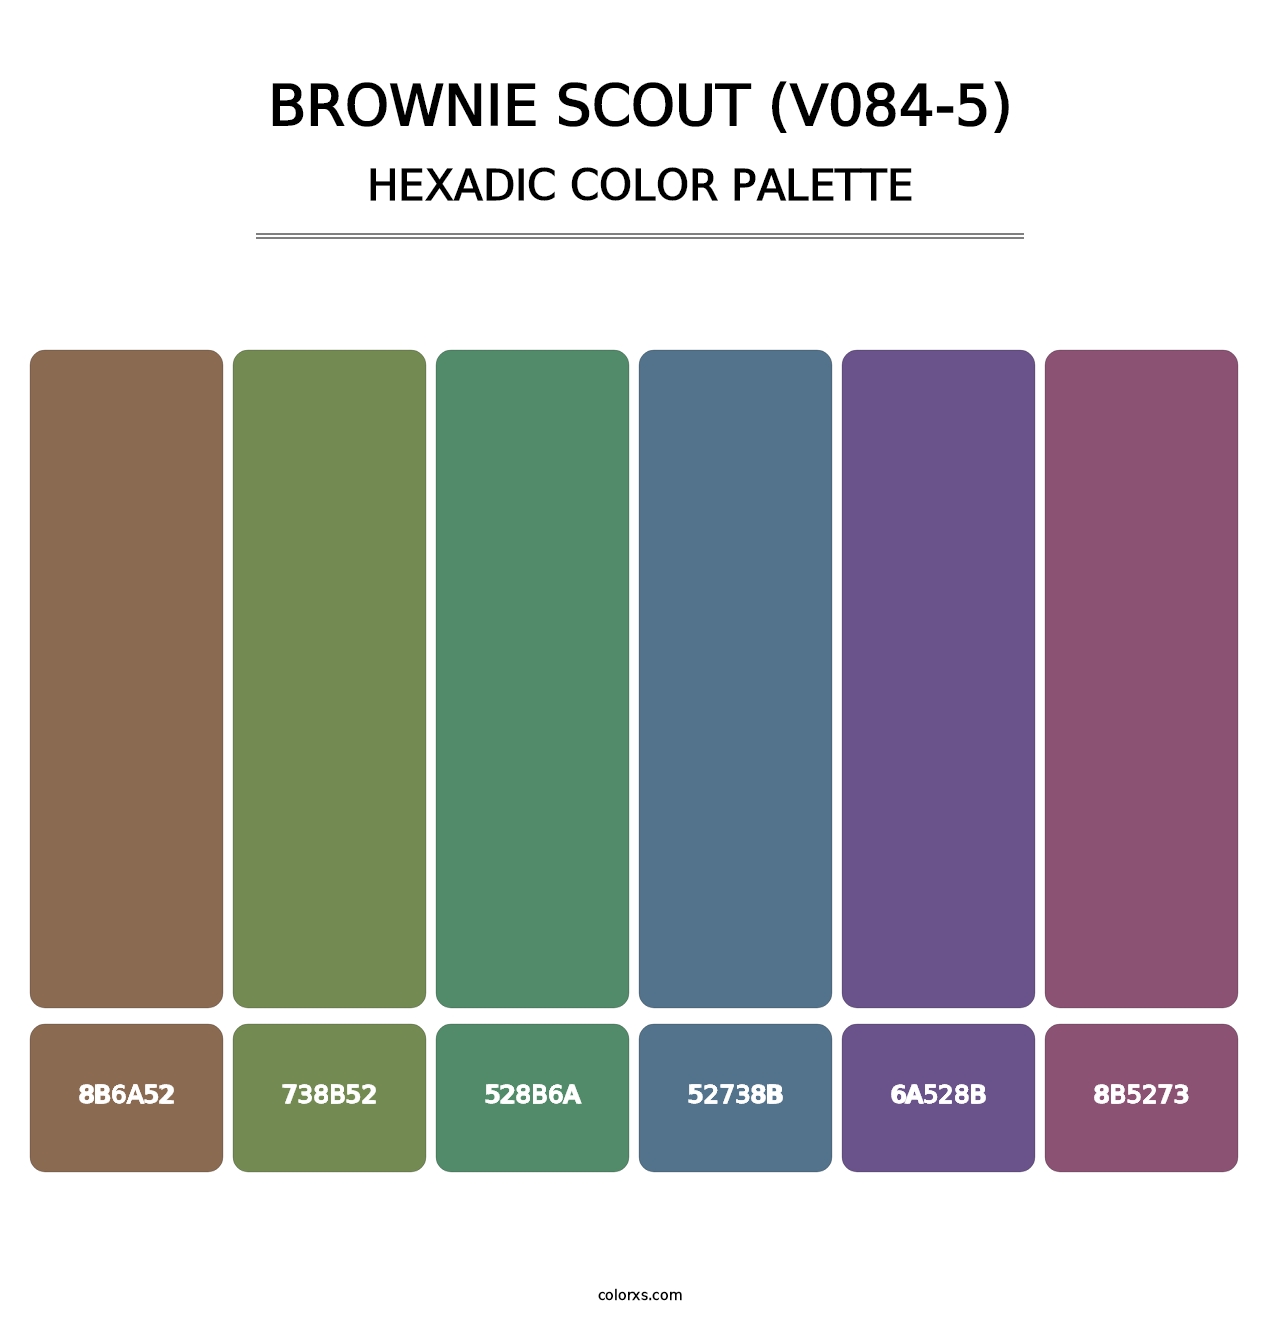 Brownie Scout (V084-5) - Hexadic Color Palette